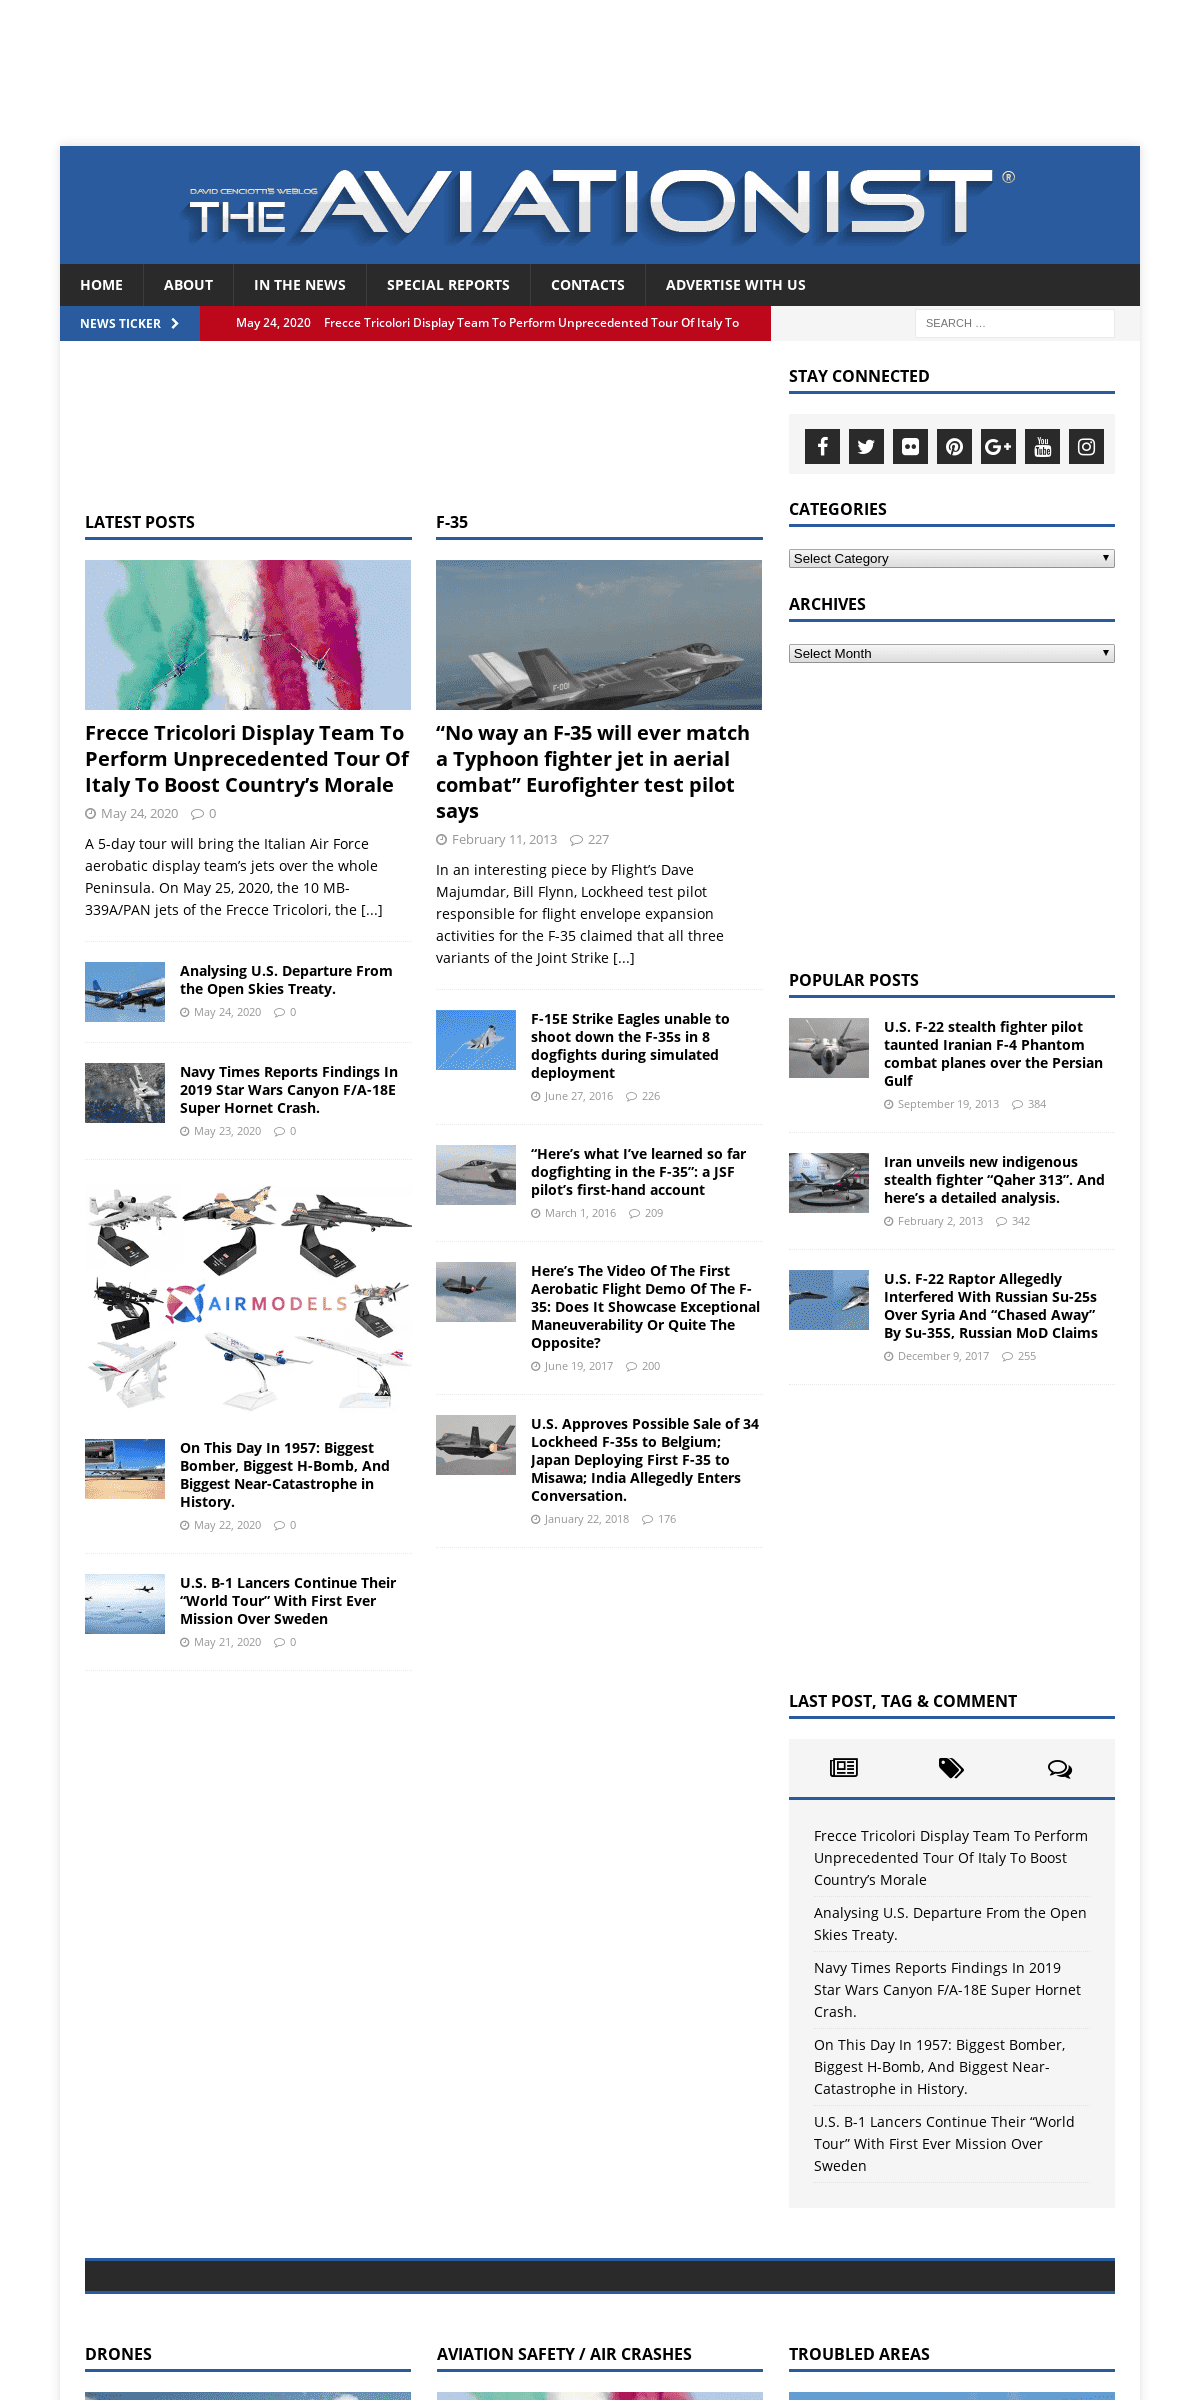 A complete backup of theaviationist.com